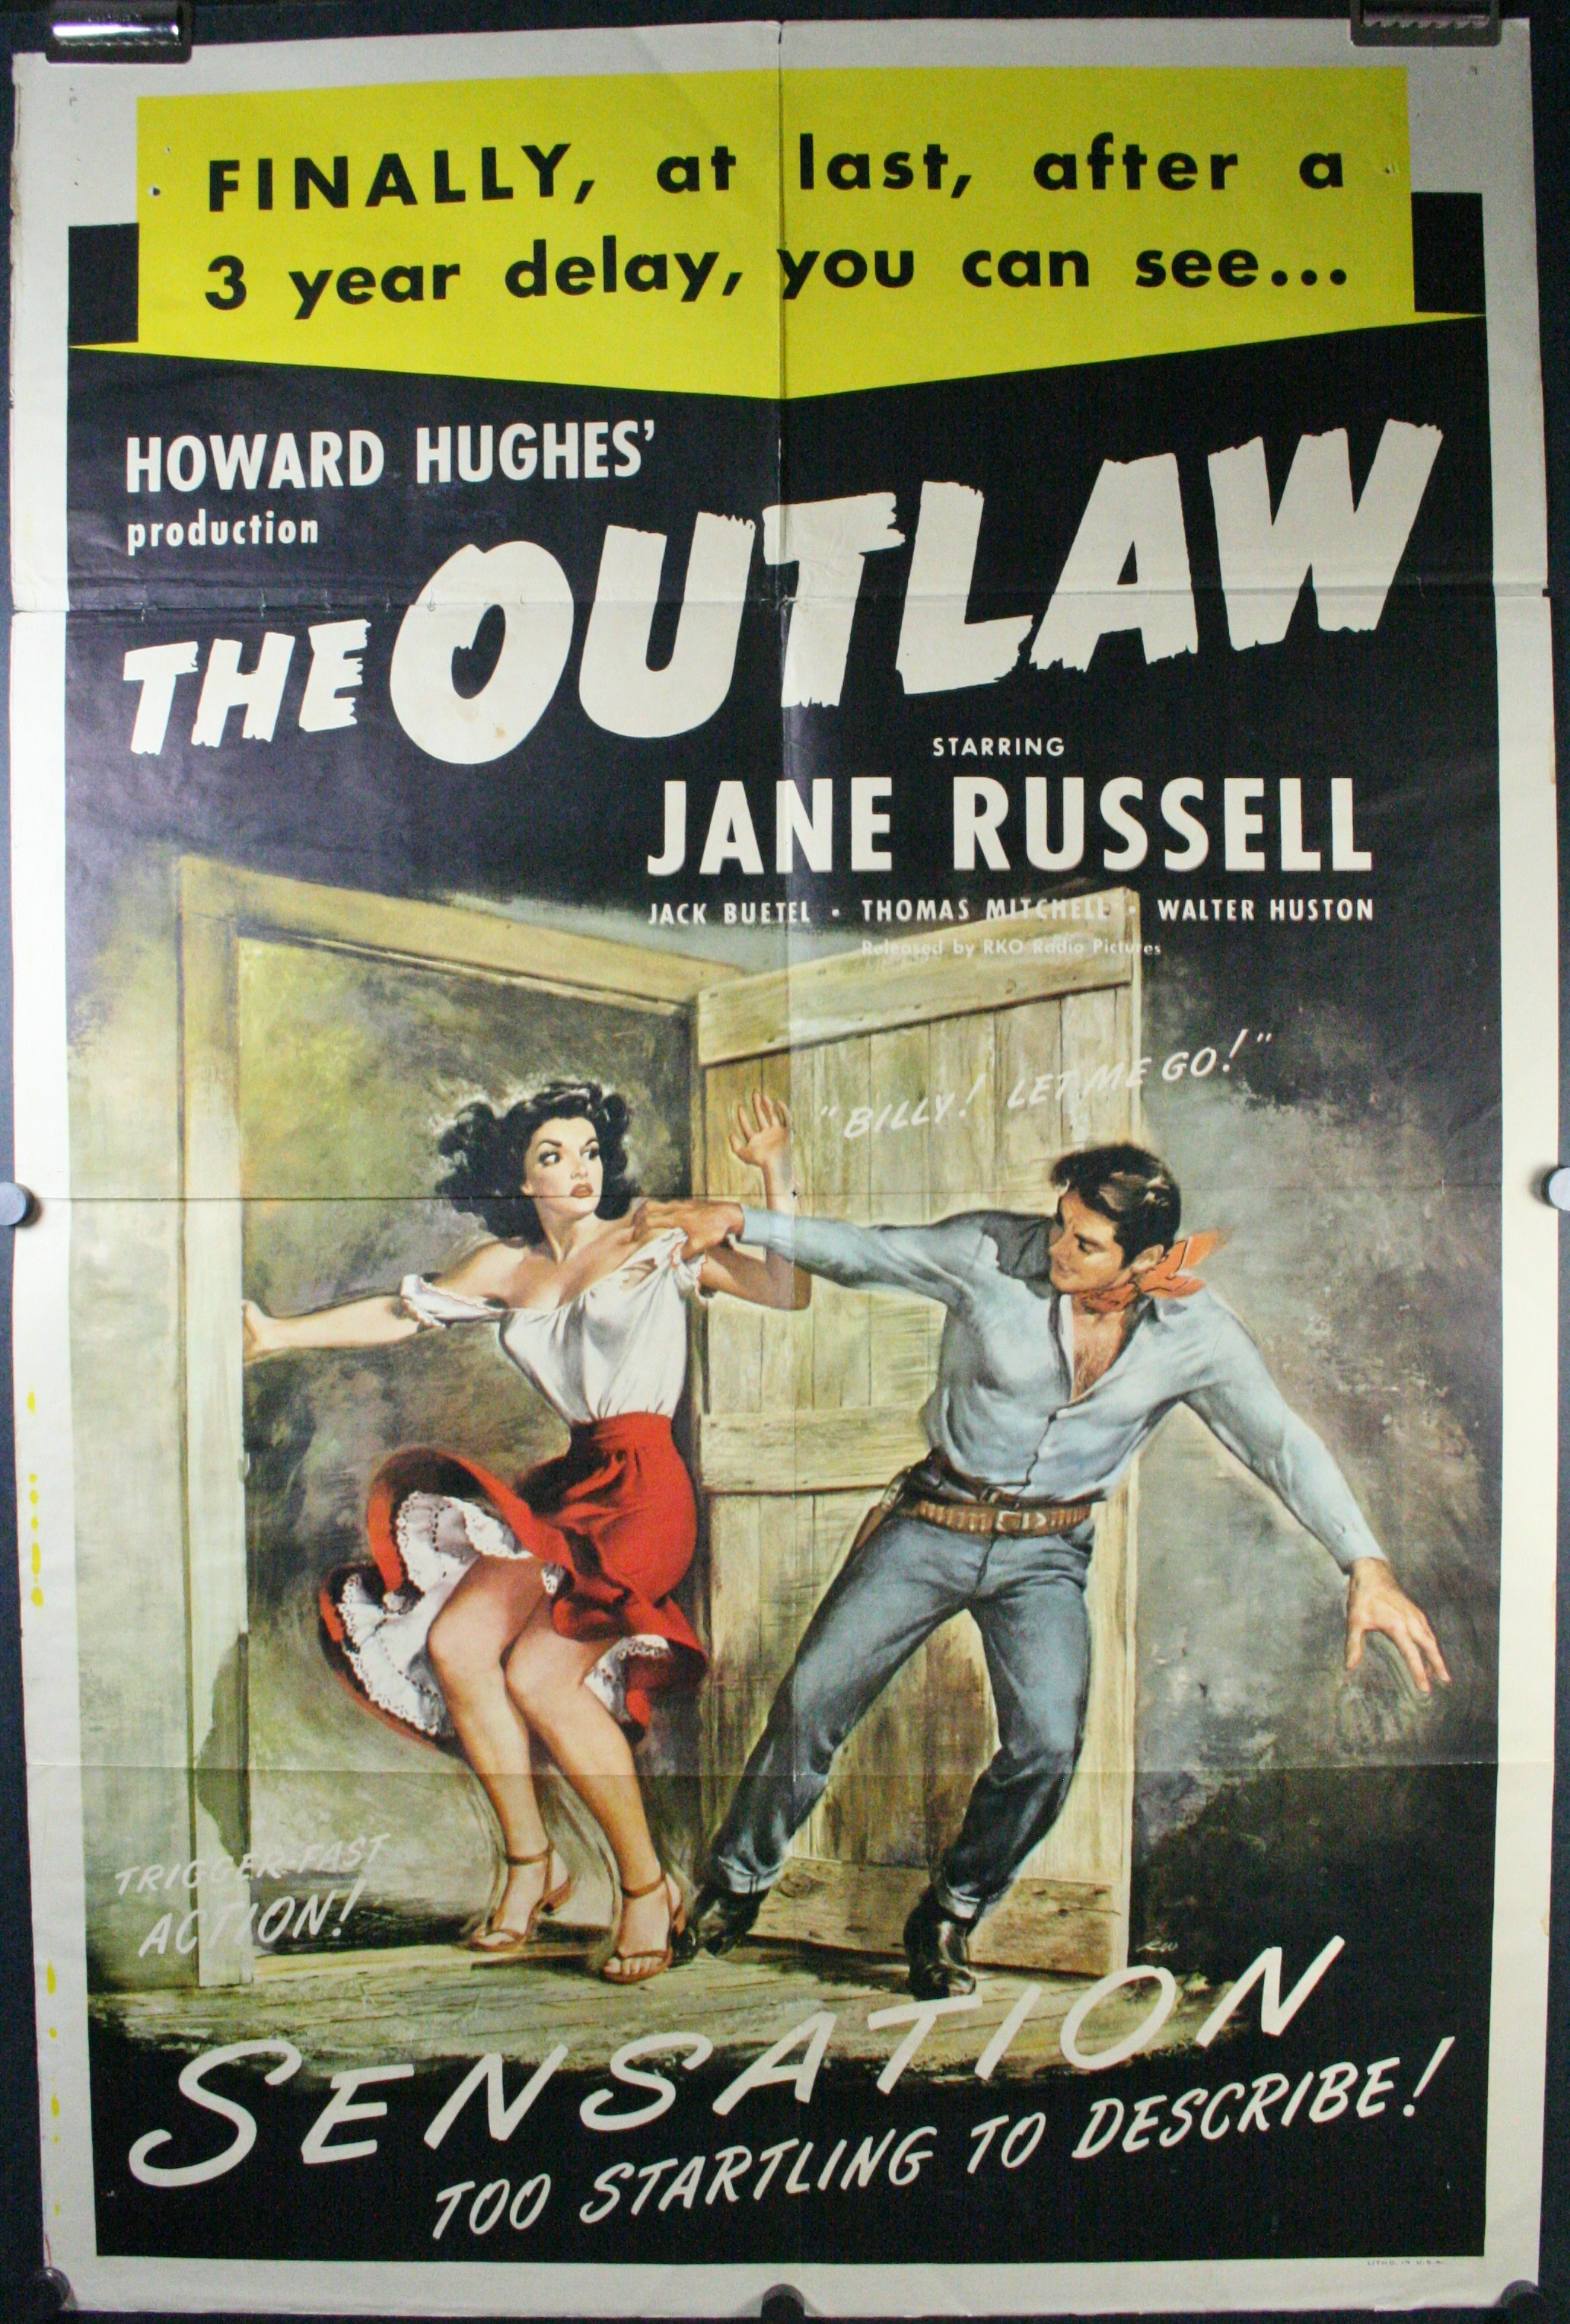 Howard Hughes RKO Jane Russell Cowboy Jack Beutel Western Country Original 1950 The Outlaw Movie Poster Lobby Card